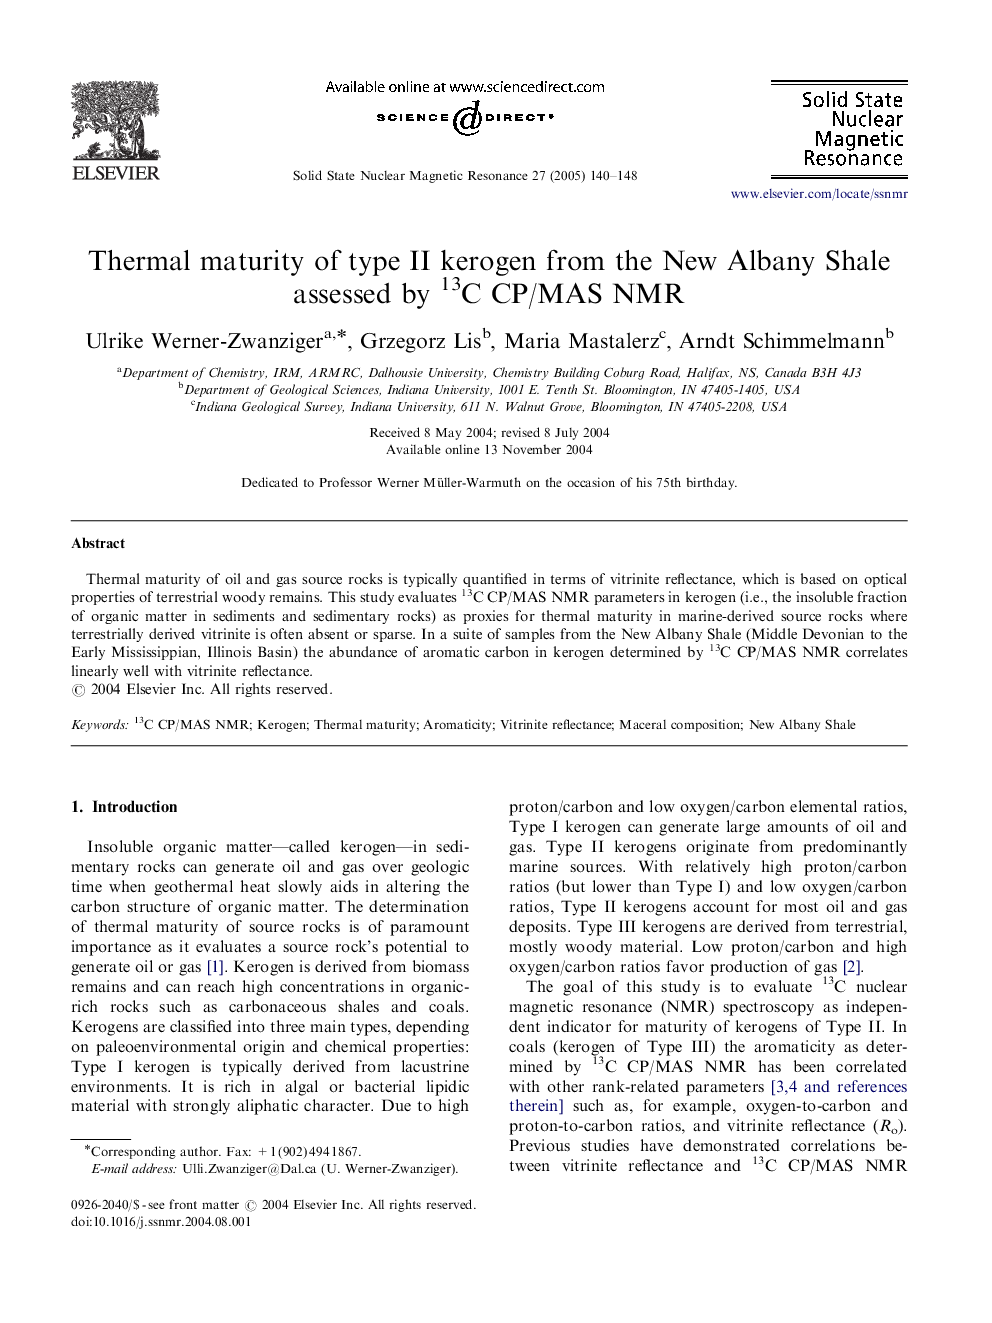 Thermal maturity of type II kerogen from the New Albany Shale assessed by 13C CP/MAS NMR